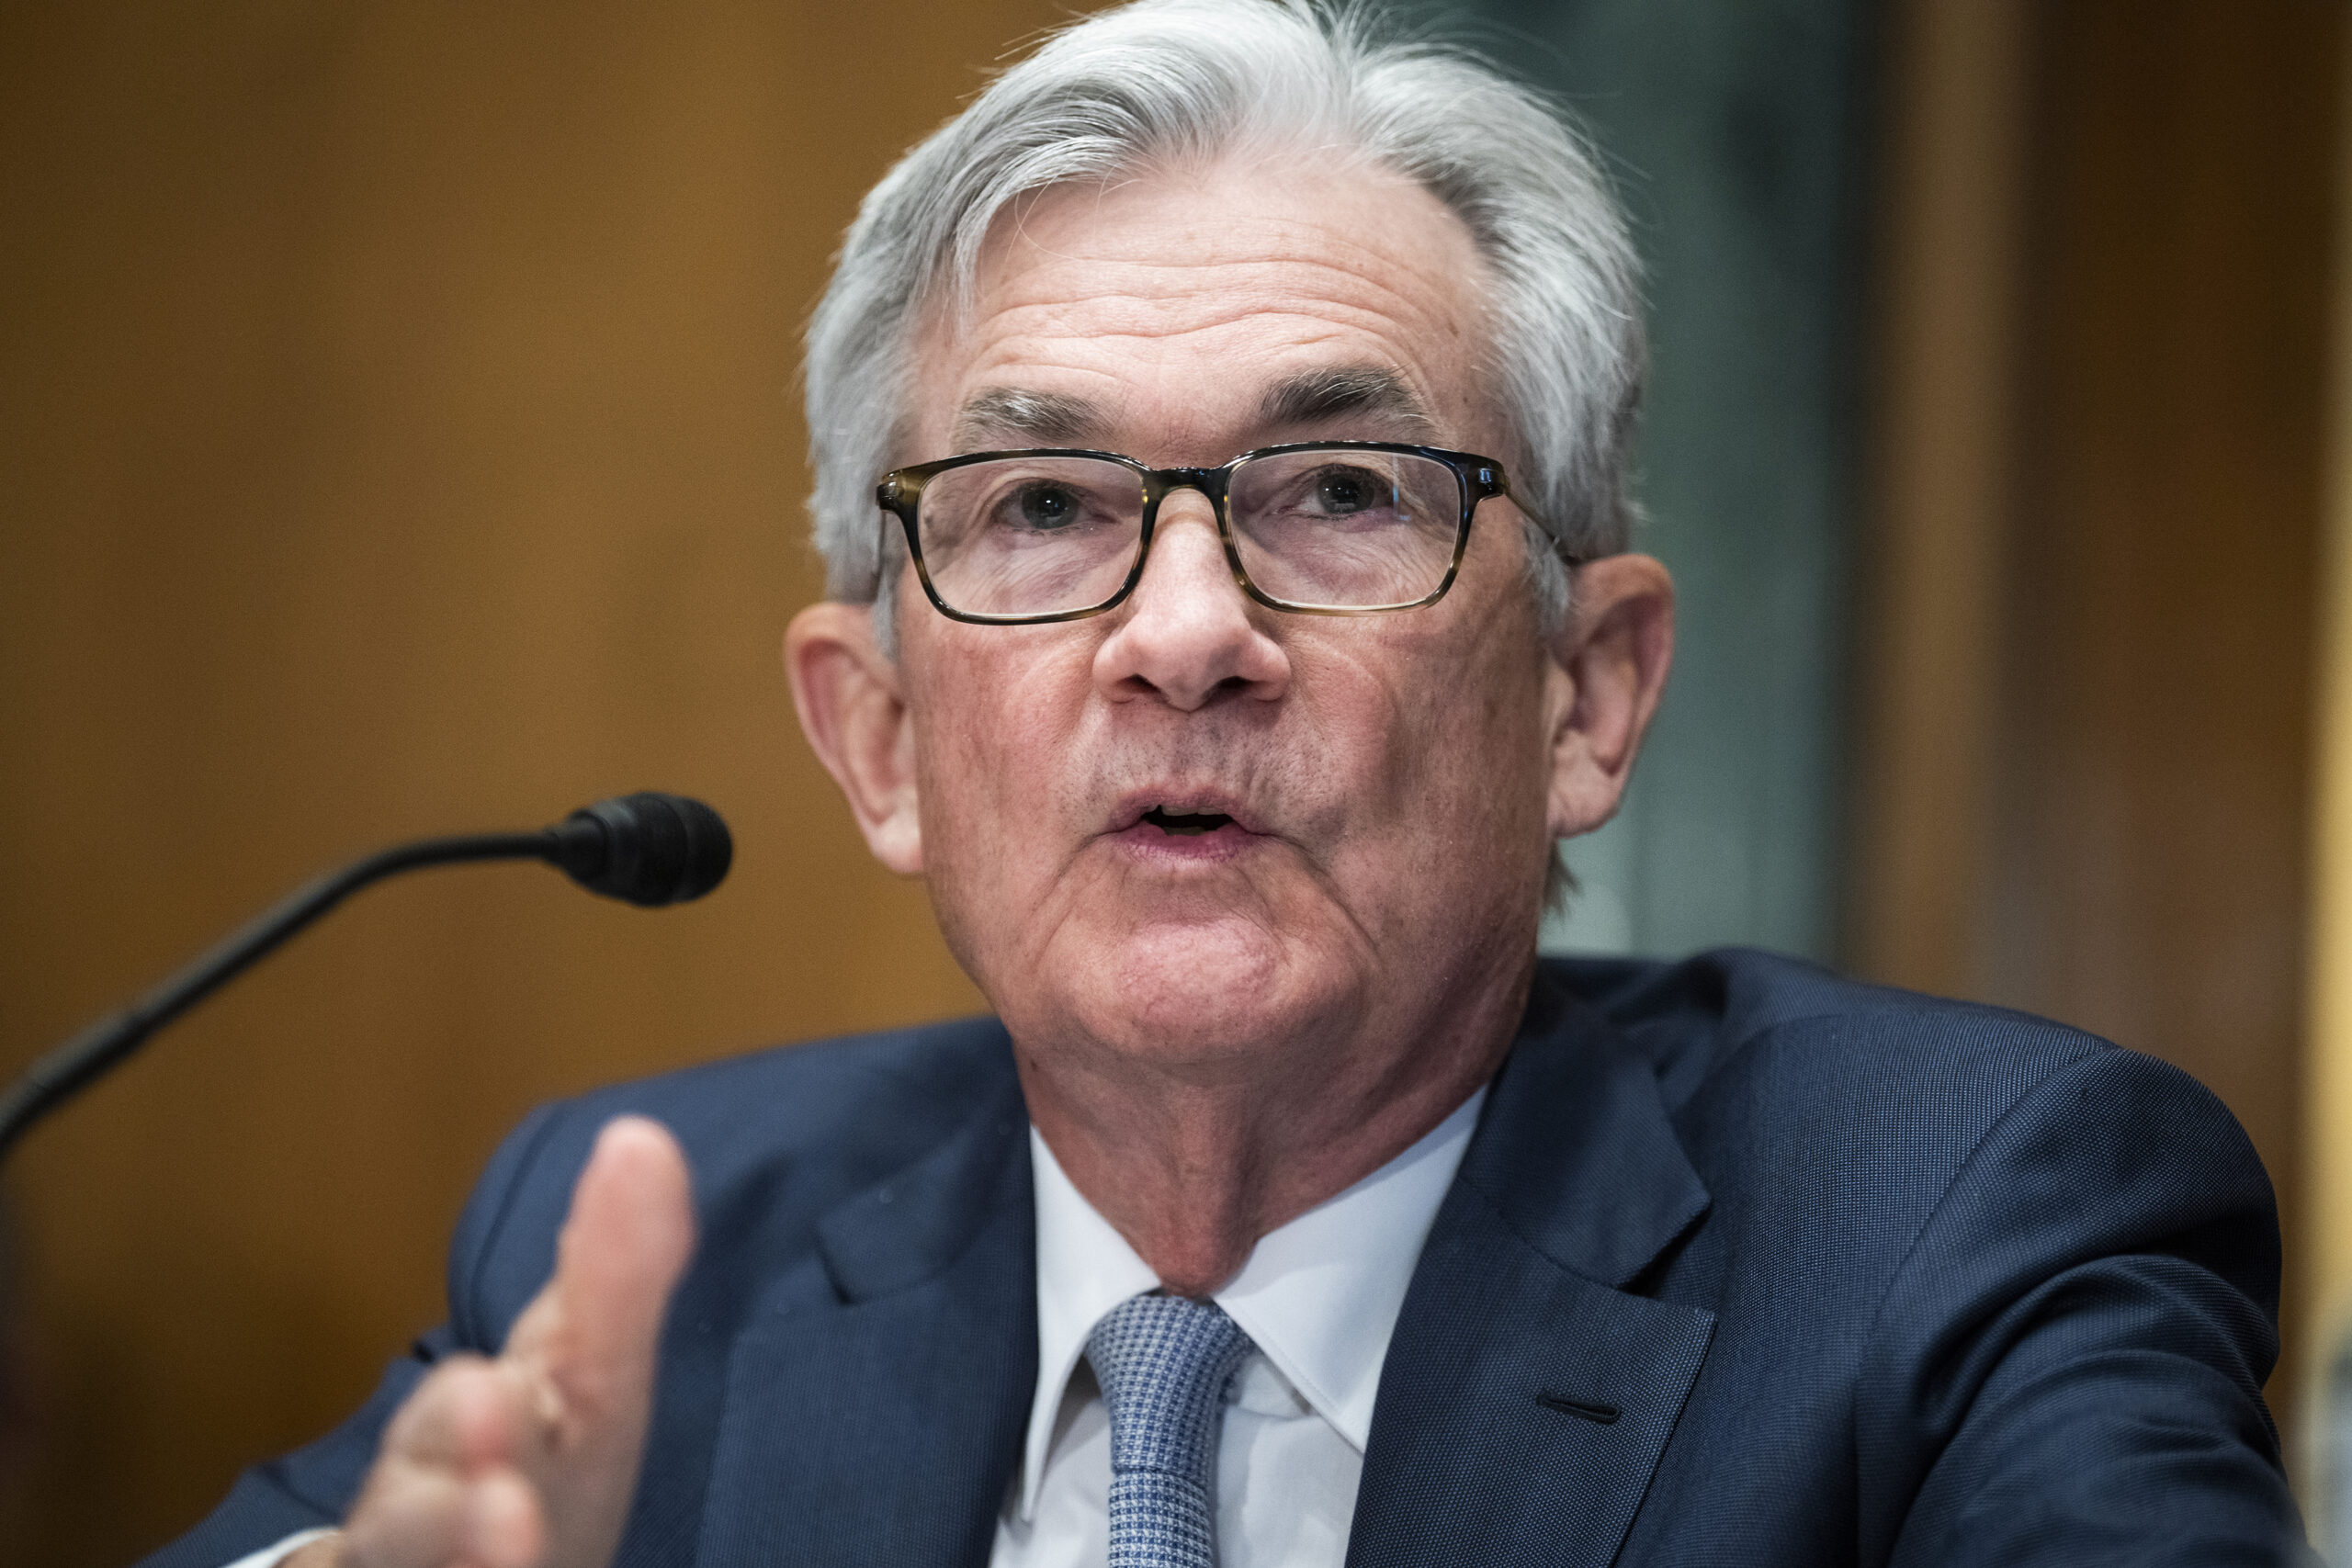 Federal Reserve Chairman Jerome Powell testifies before the Senate Banking Committee hearing, Thursday, March 3, 2022 on Capitol Hill in Washington. (Tom Williams, Pool via AP)